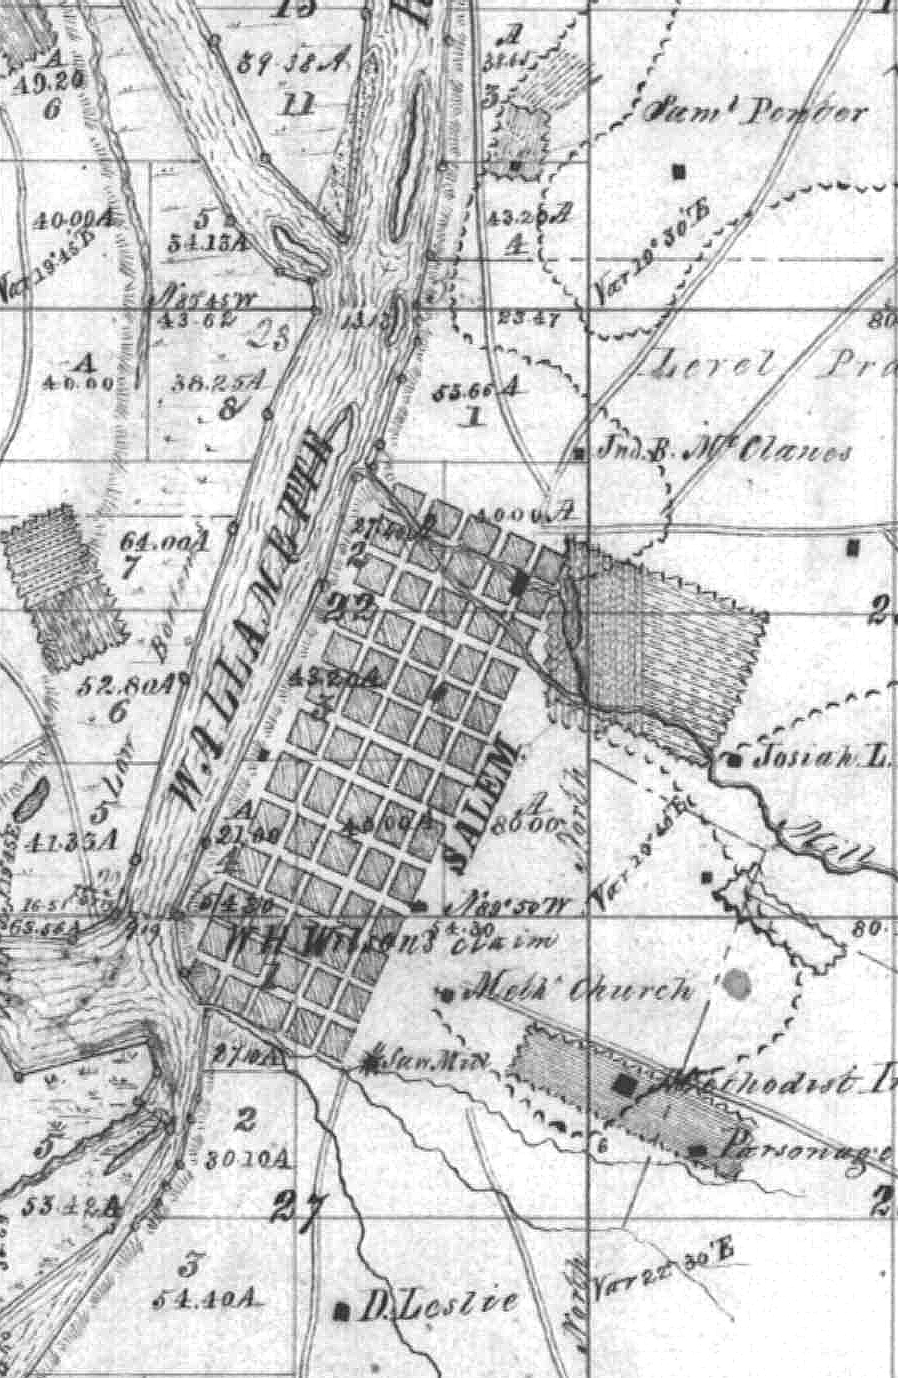 Photo of old survey map